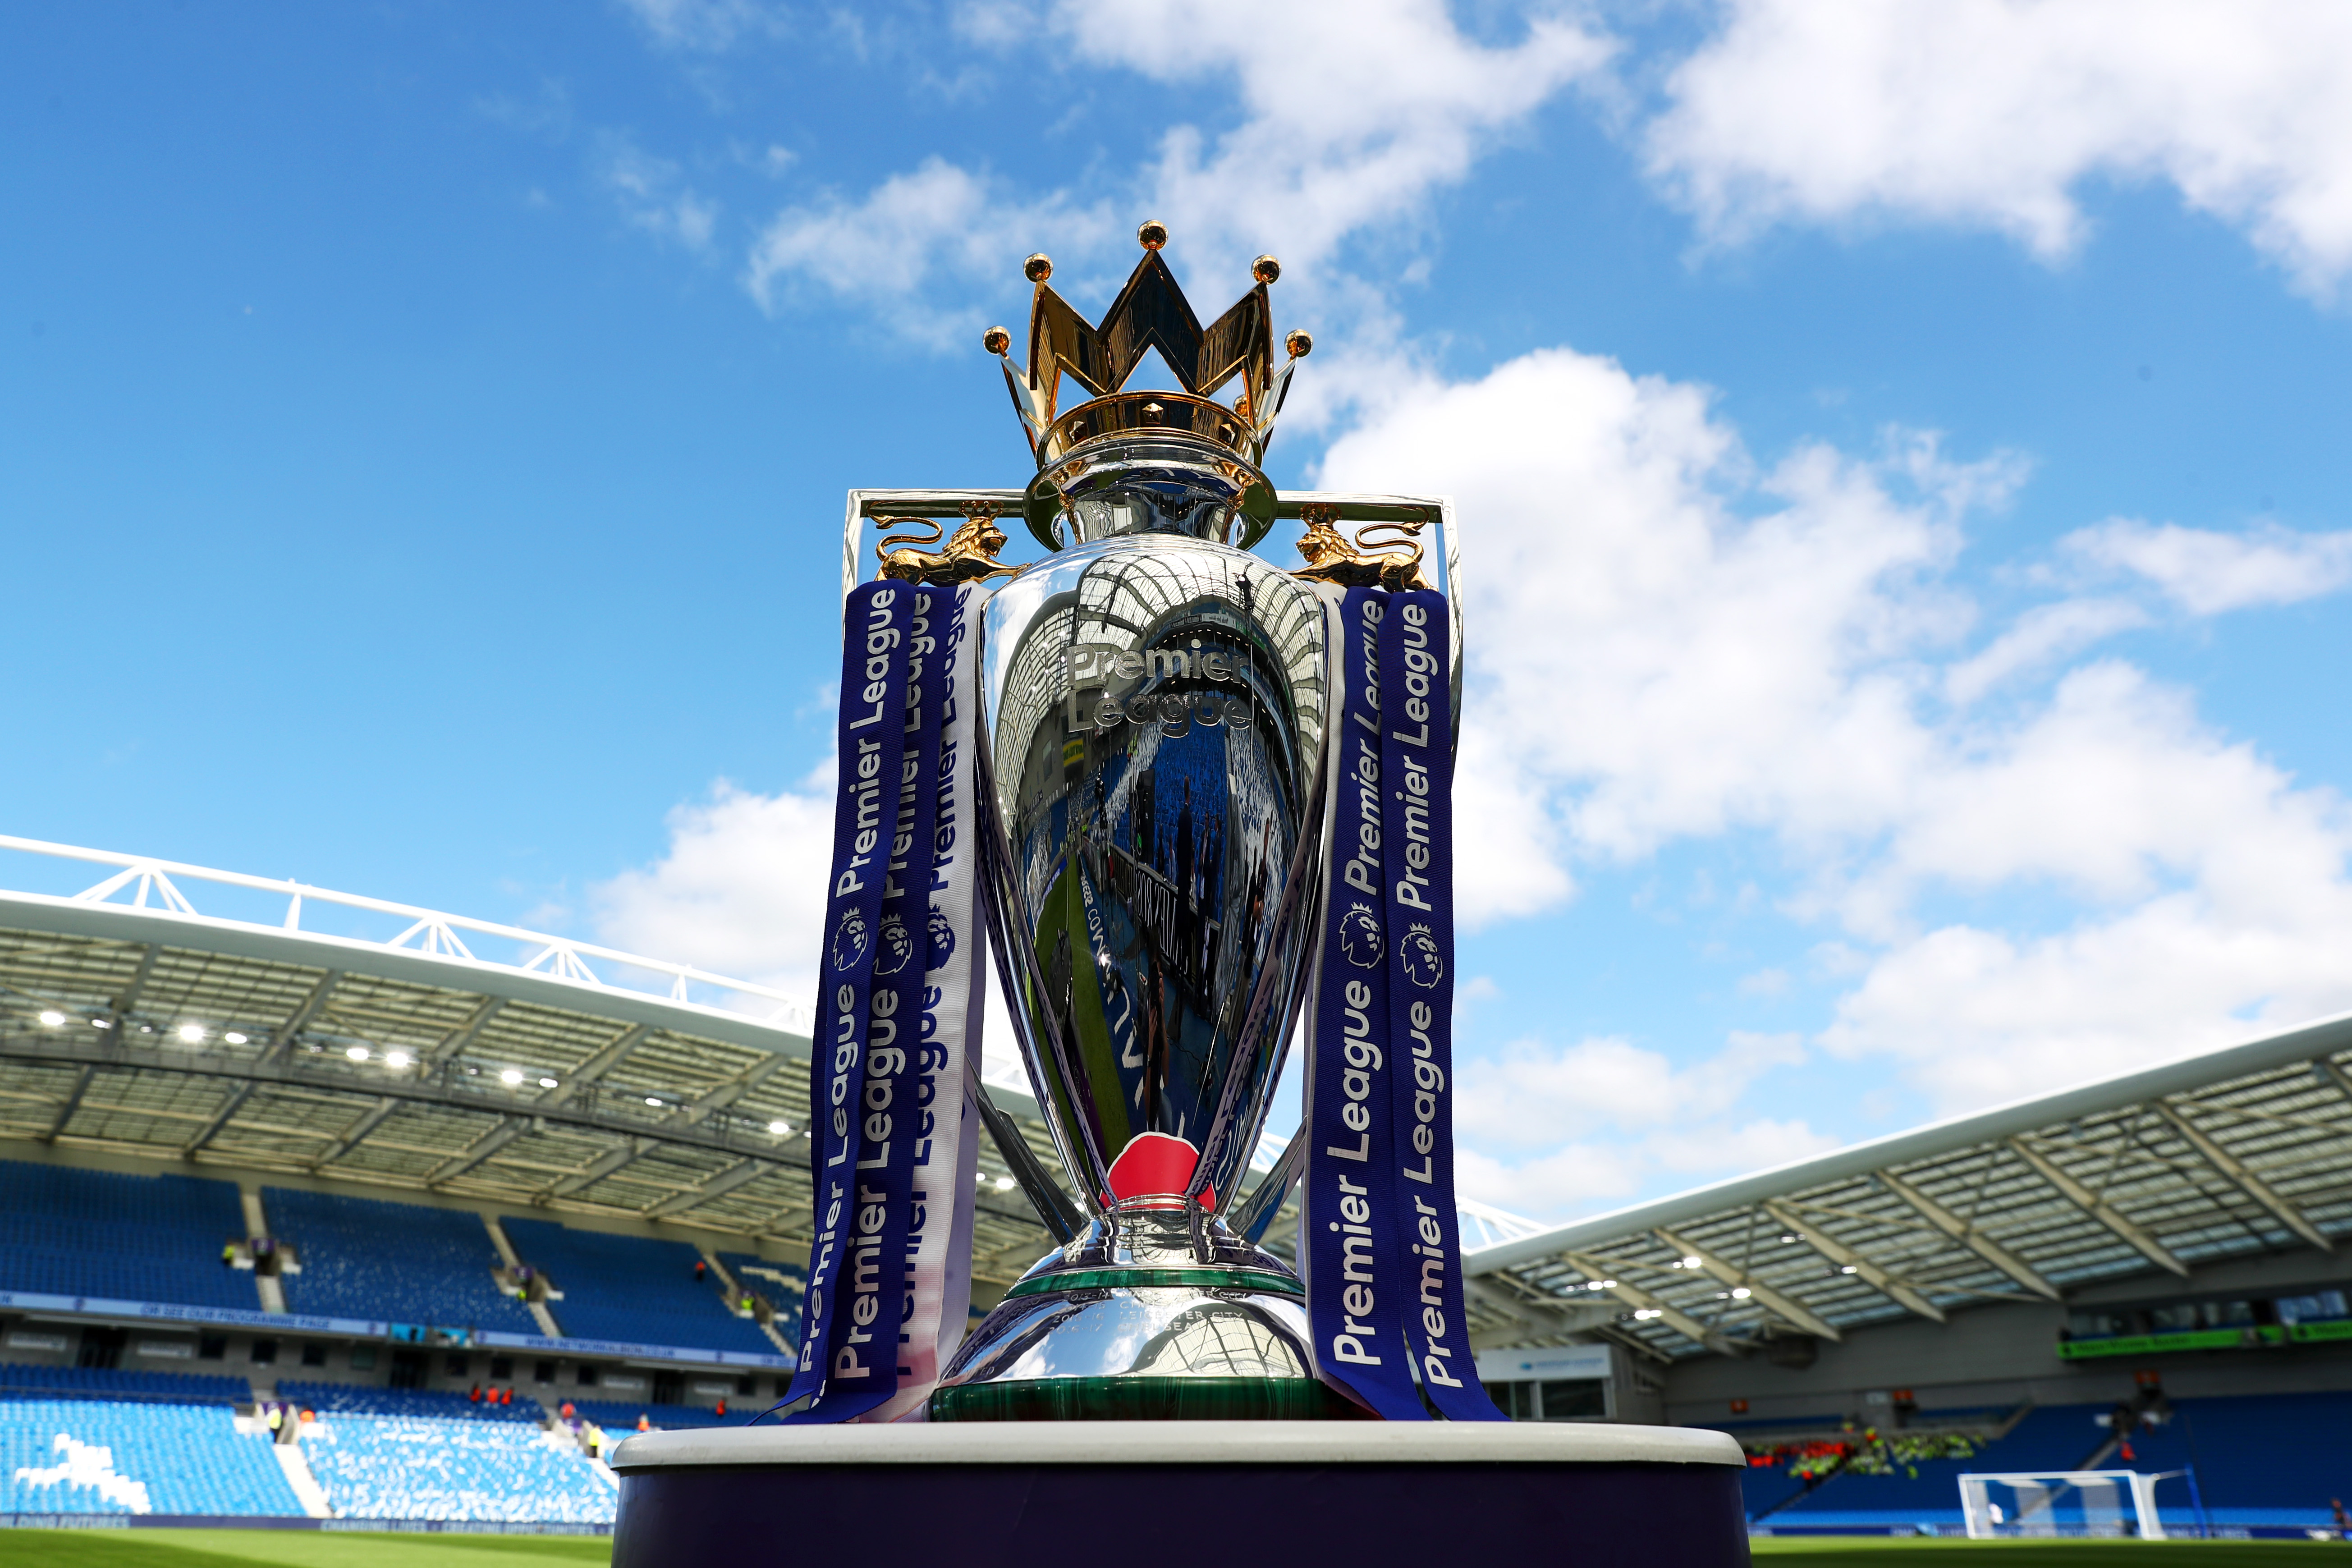 BRIGHTON, ENGLAND - AUGUST 12:  The Premier League trophy is displayed inside the stadium before the Premier League match between Brighton and Hove Albion and Manchester City at Amex Stadium on August 12, 2017 in Brighton, England.  (Photo by Dan Istitene/Getty Images)